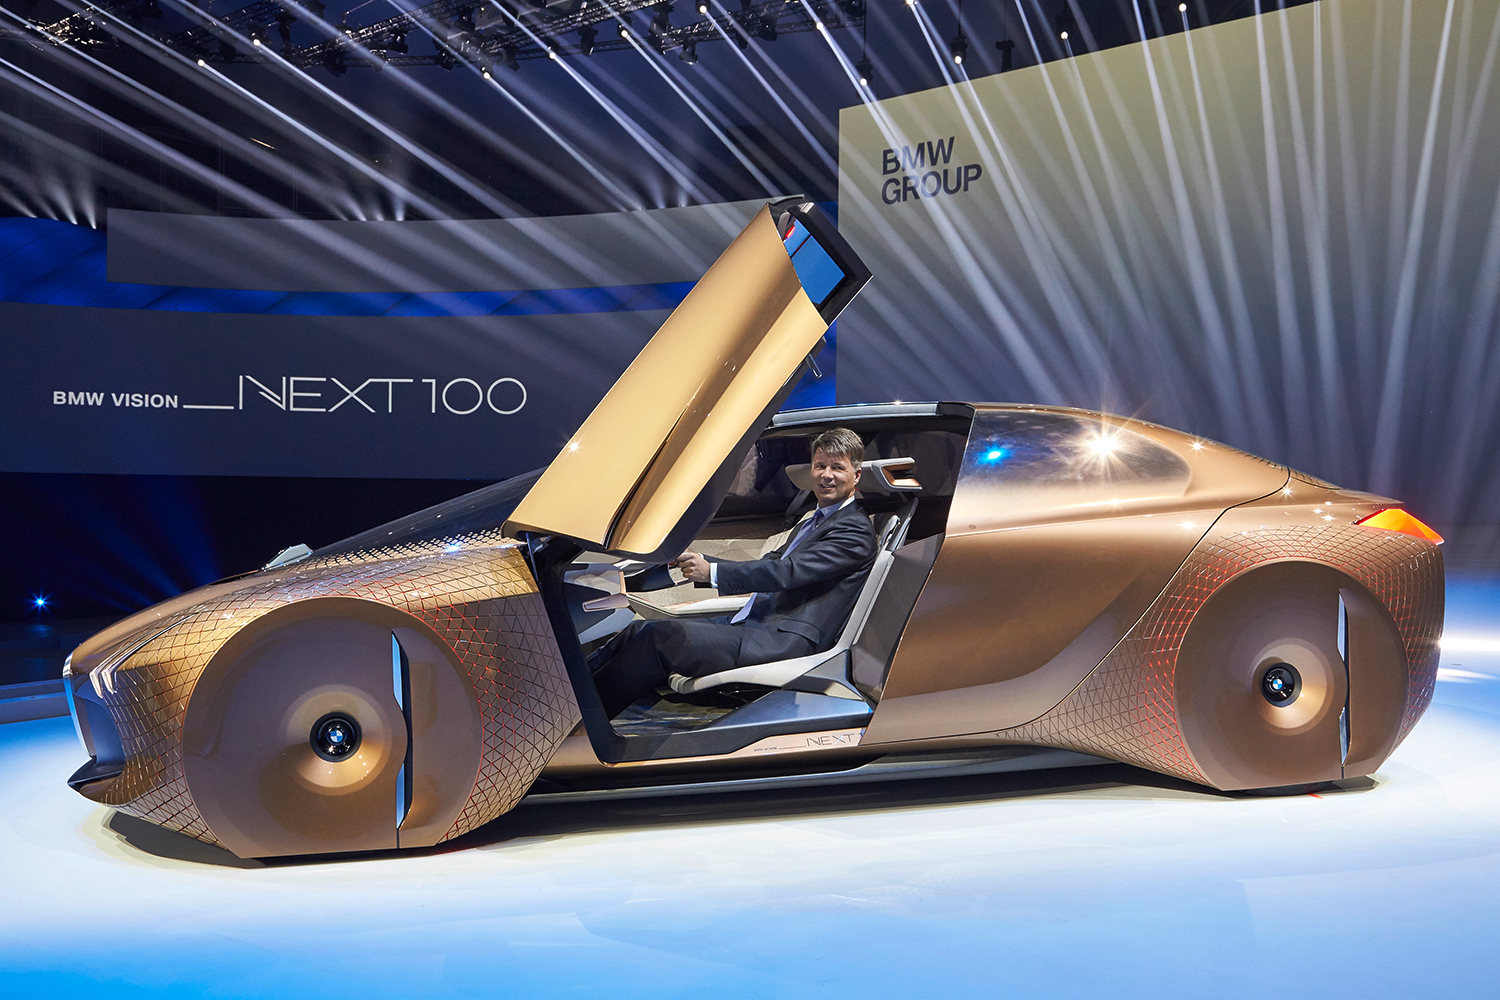 bmw vision next 100 news specs pics performance years 2116 concept 3